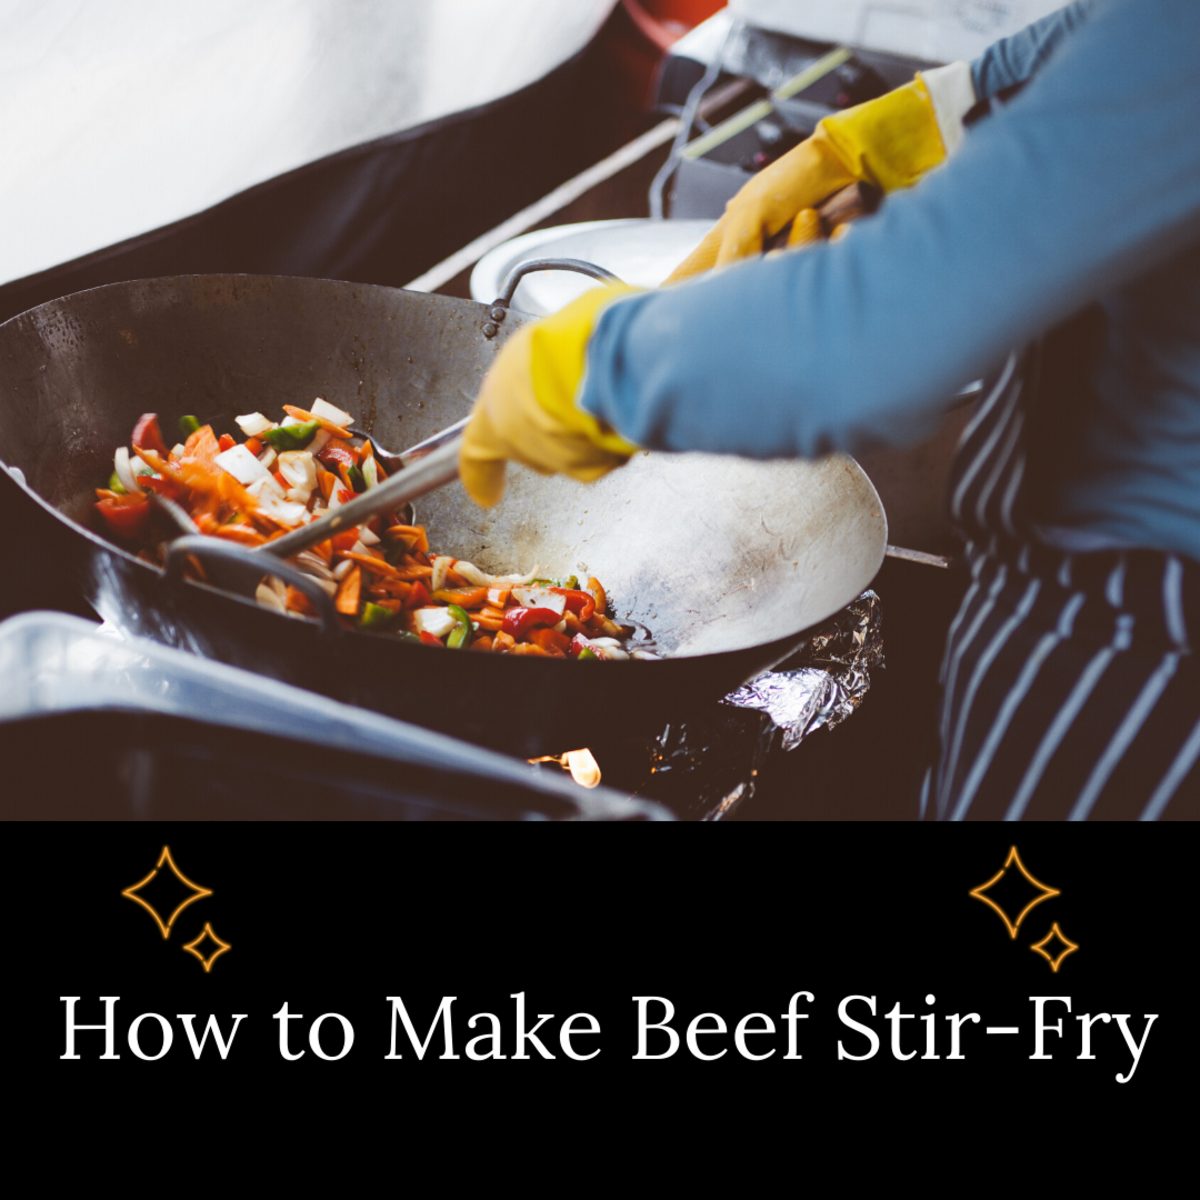 Beef stir-fry is a healthy and nutritious meal that everyone can enjoy. 